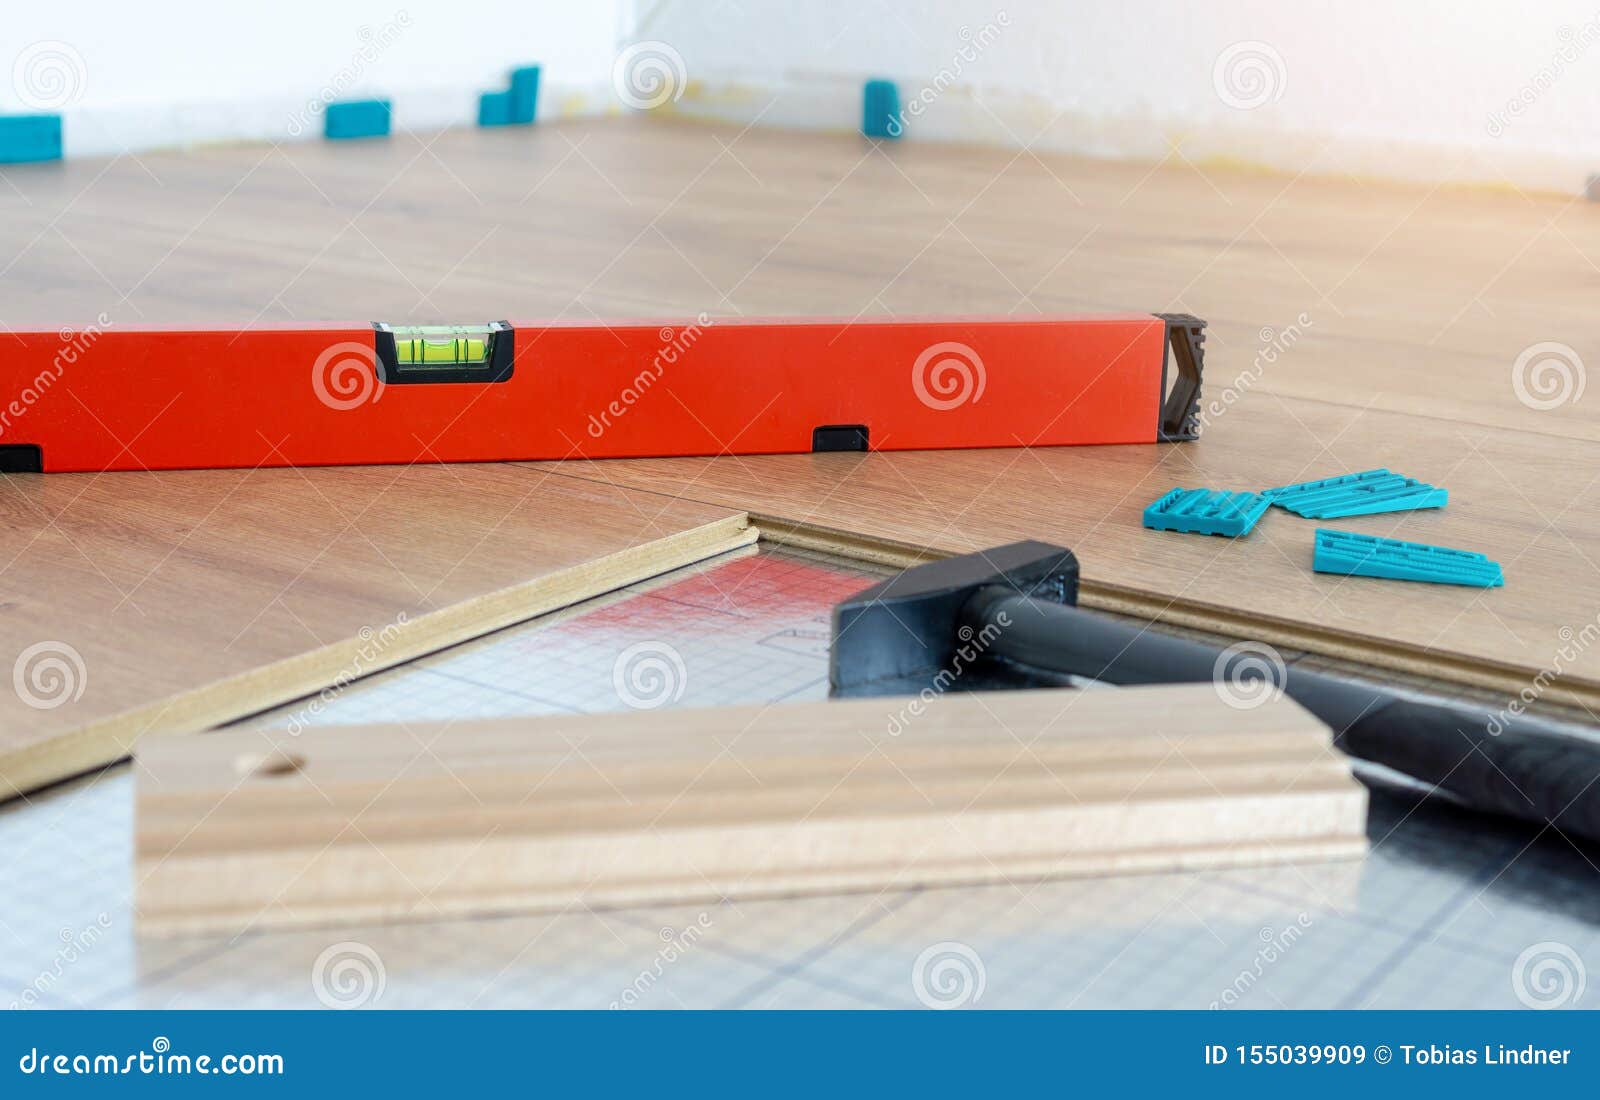 Tools And Equipment For Laying Of Laminate Floor Spirit Level